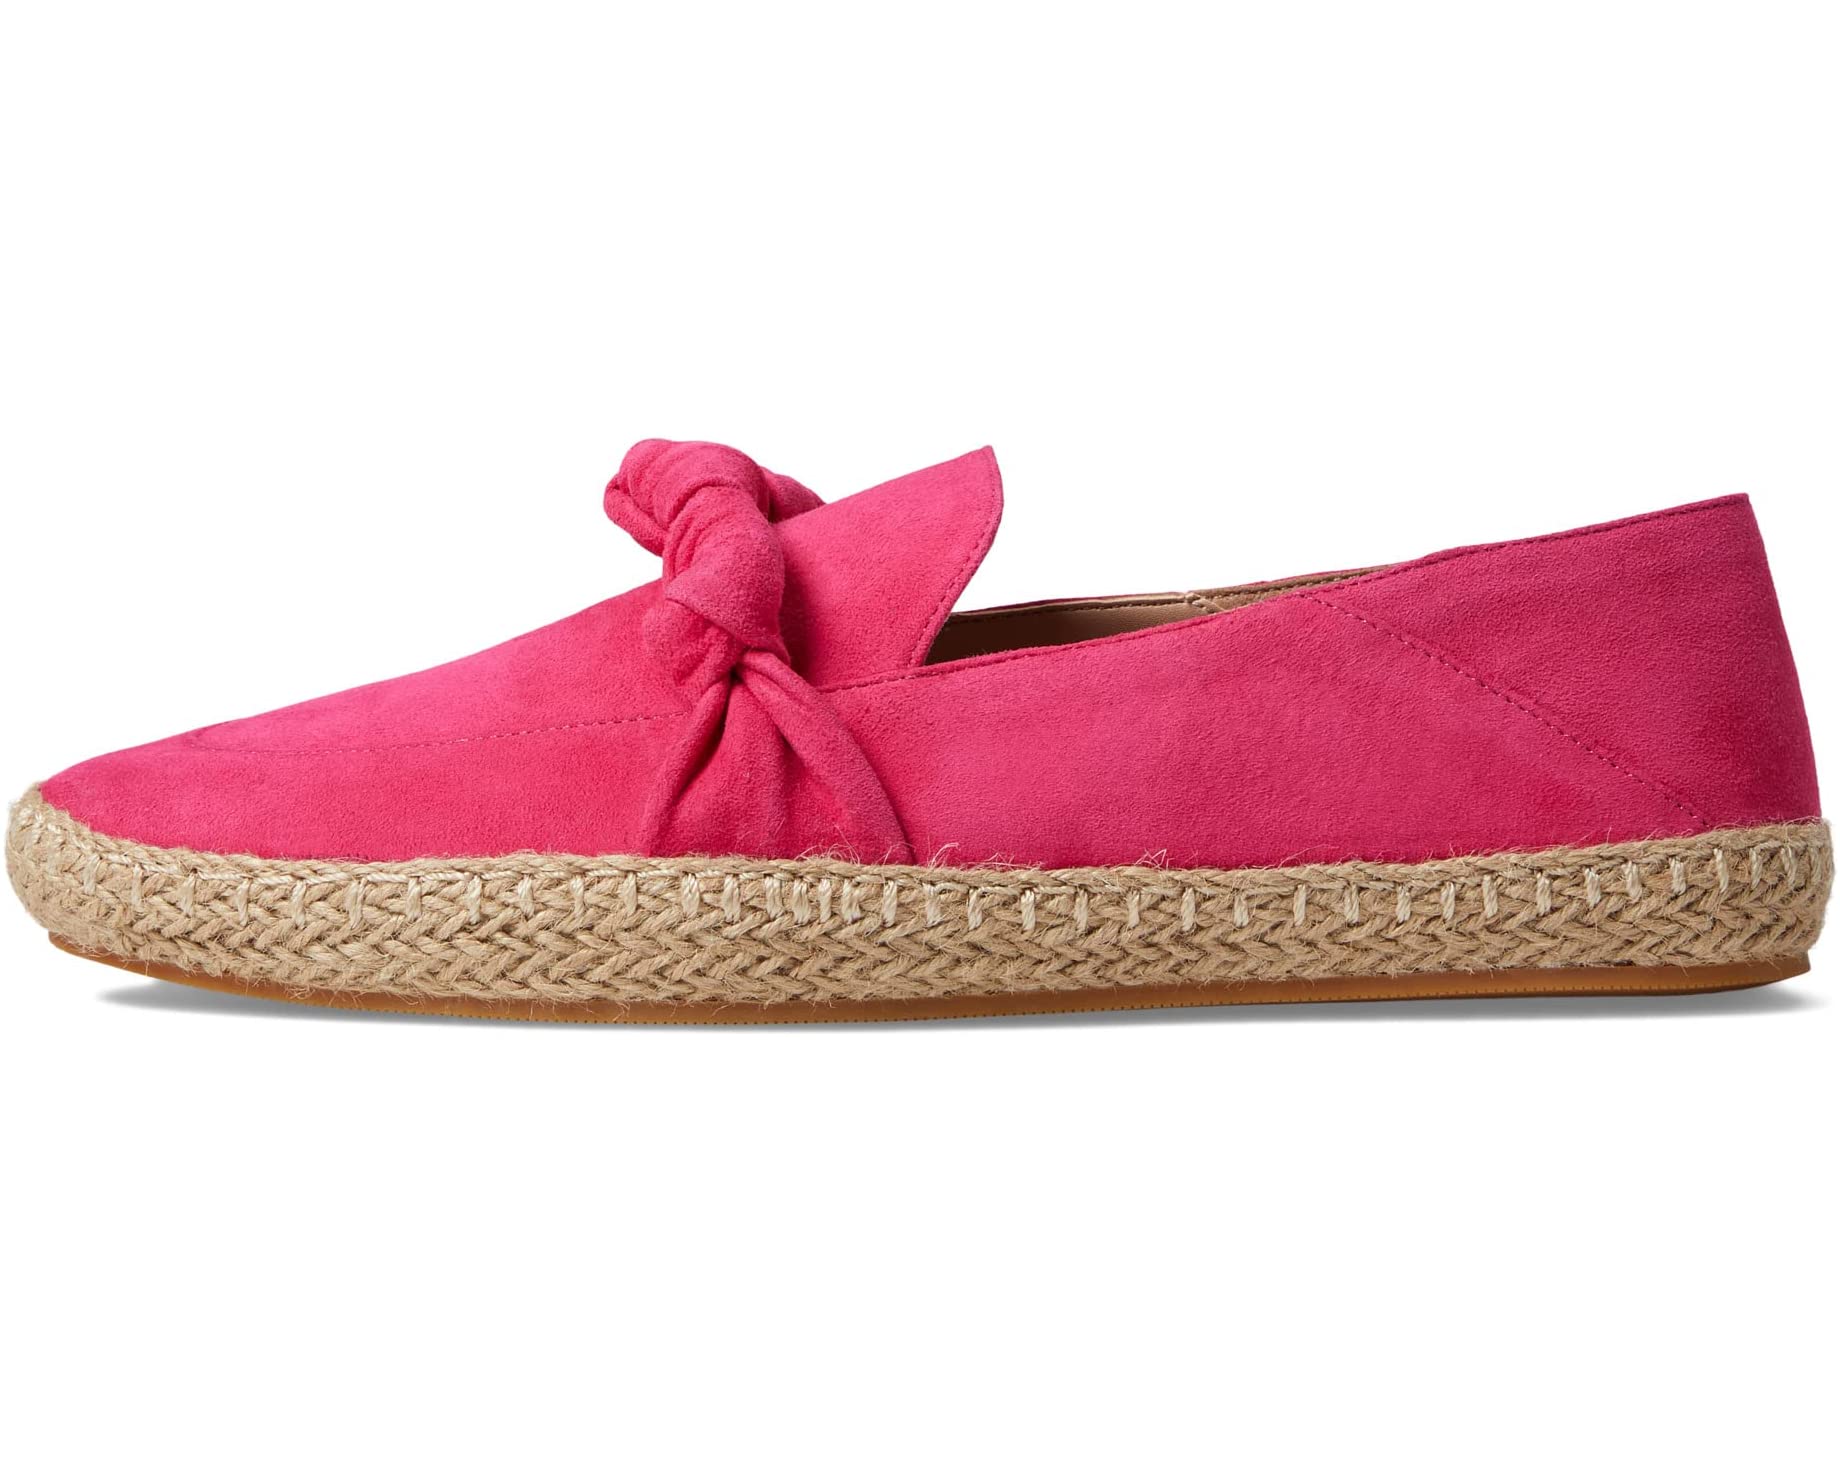 Лоферы Cloudfeel Knotted Espadrille Cole Haan, розовый